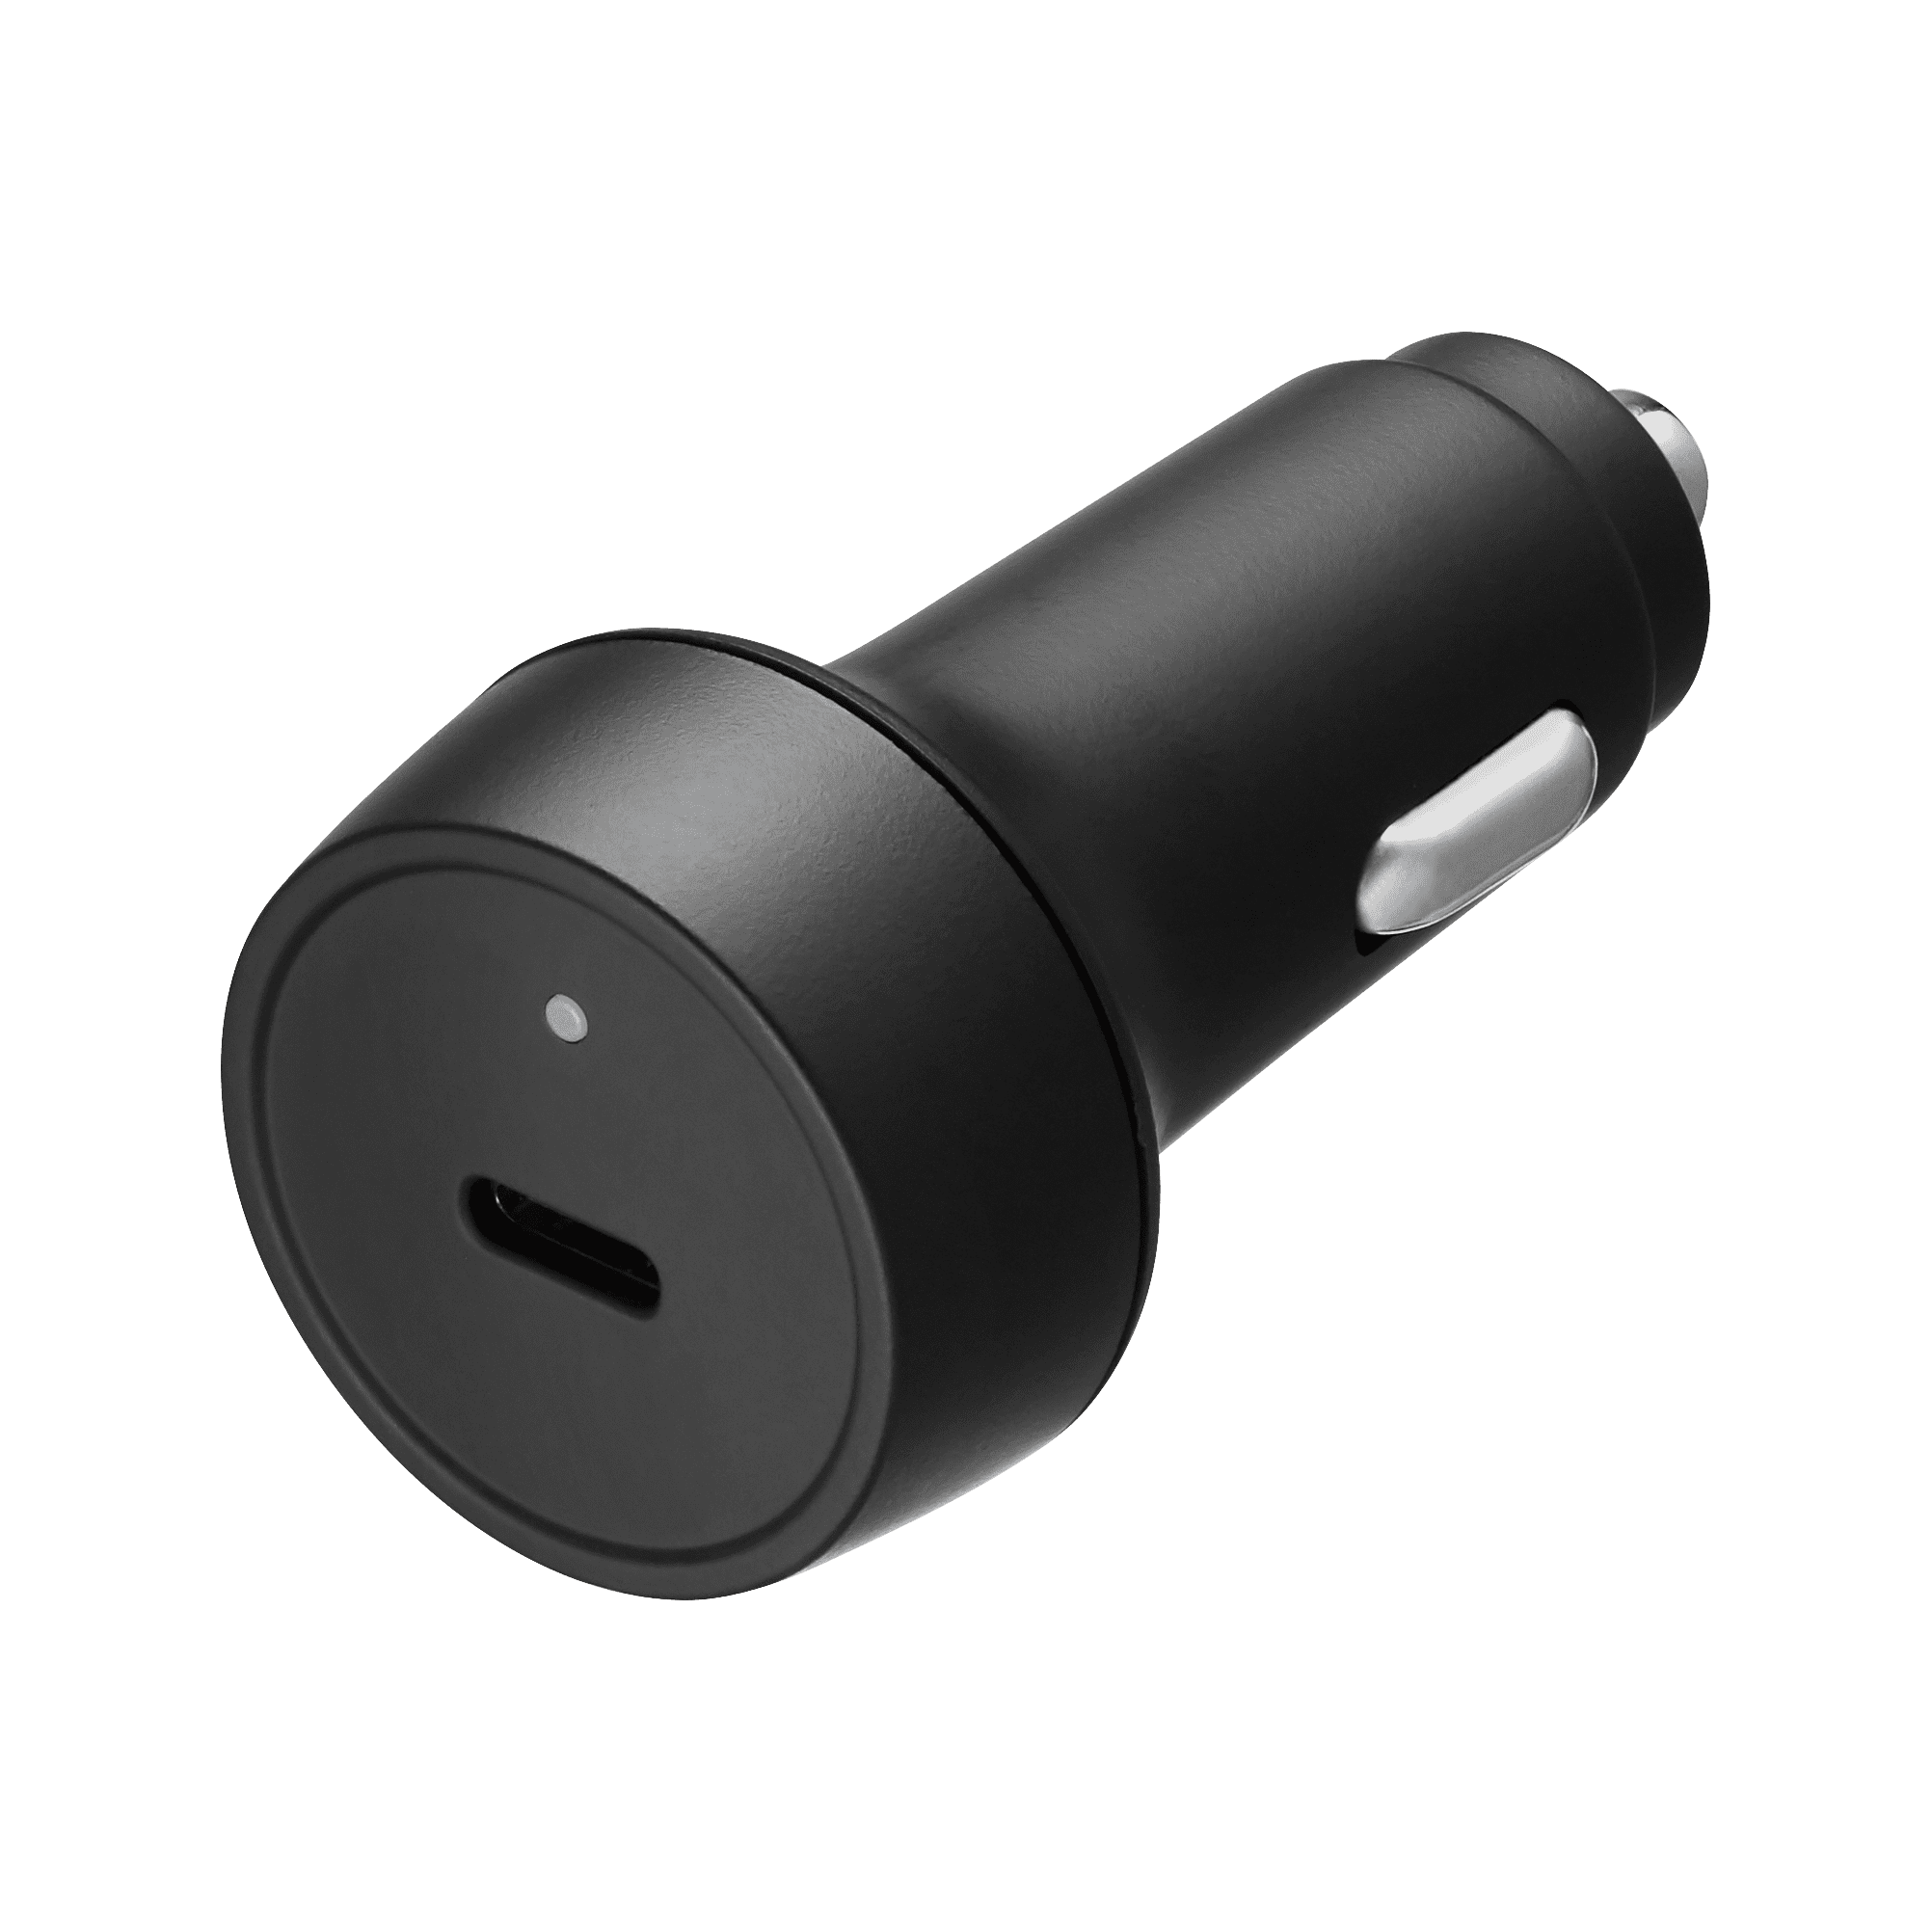 TPD-A18B (Black) Compact Car charger with LED Type-C 18W power delivery